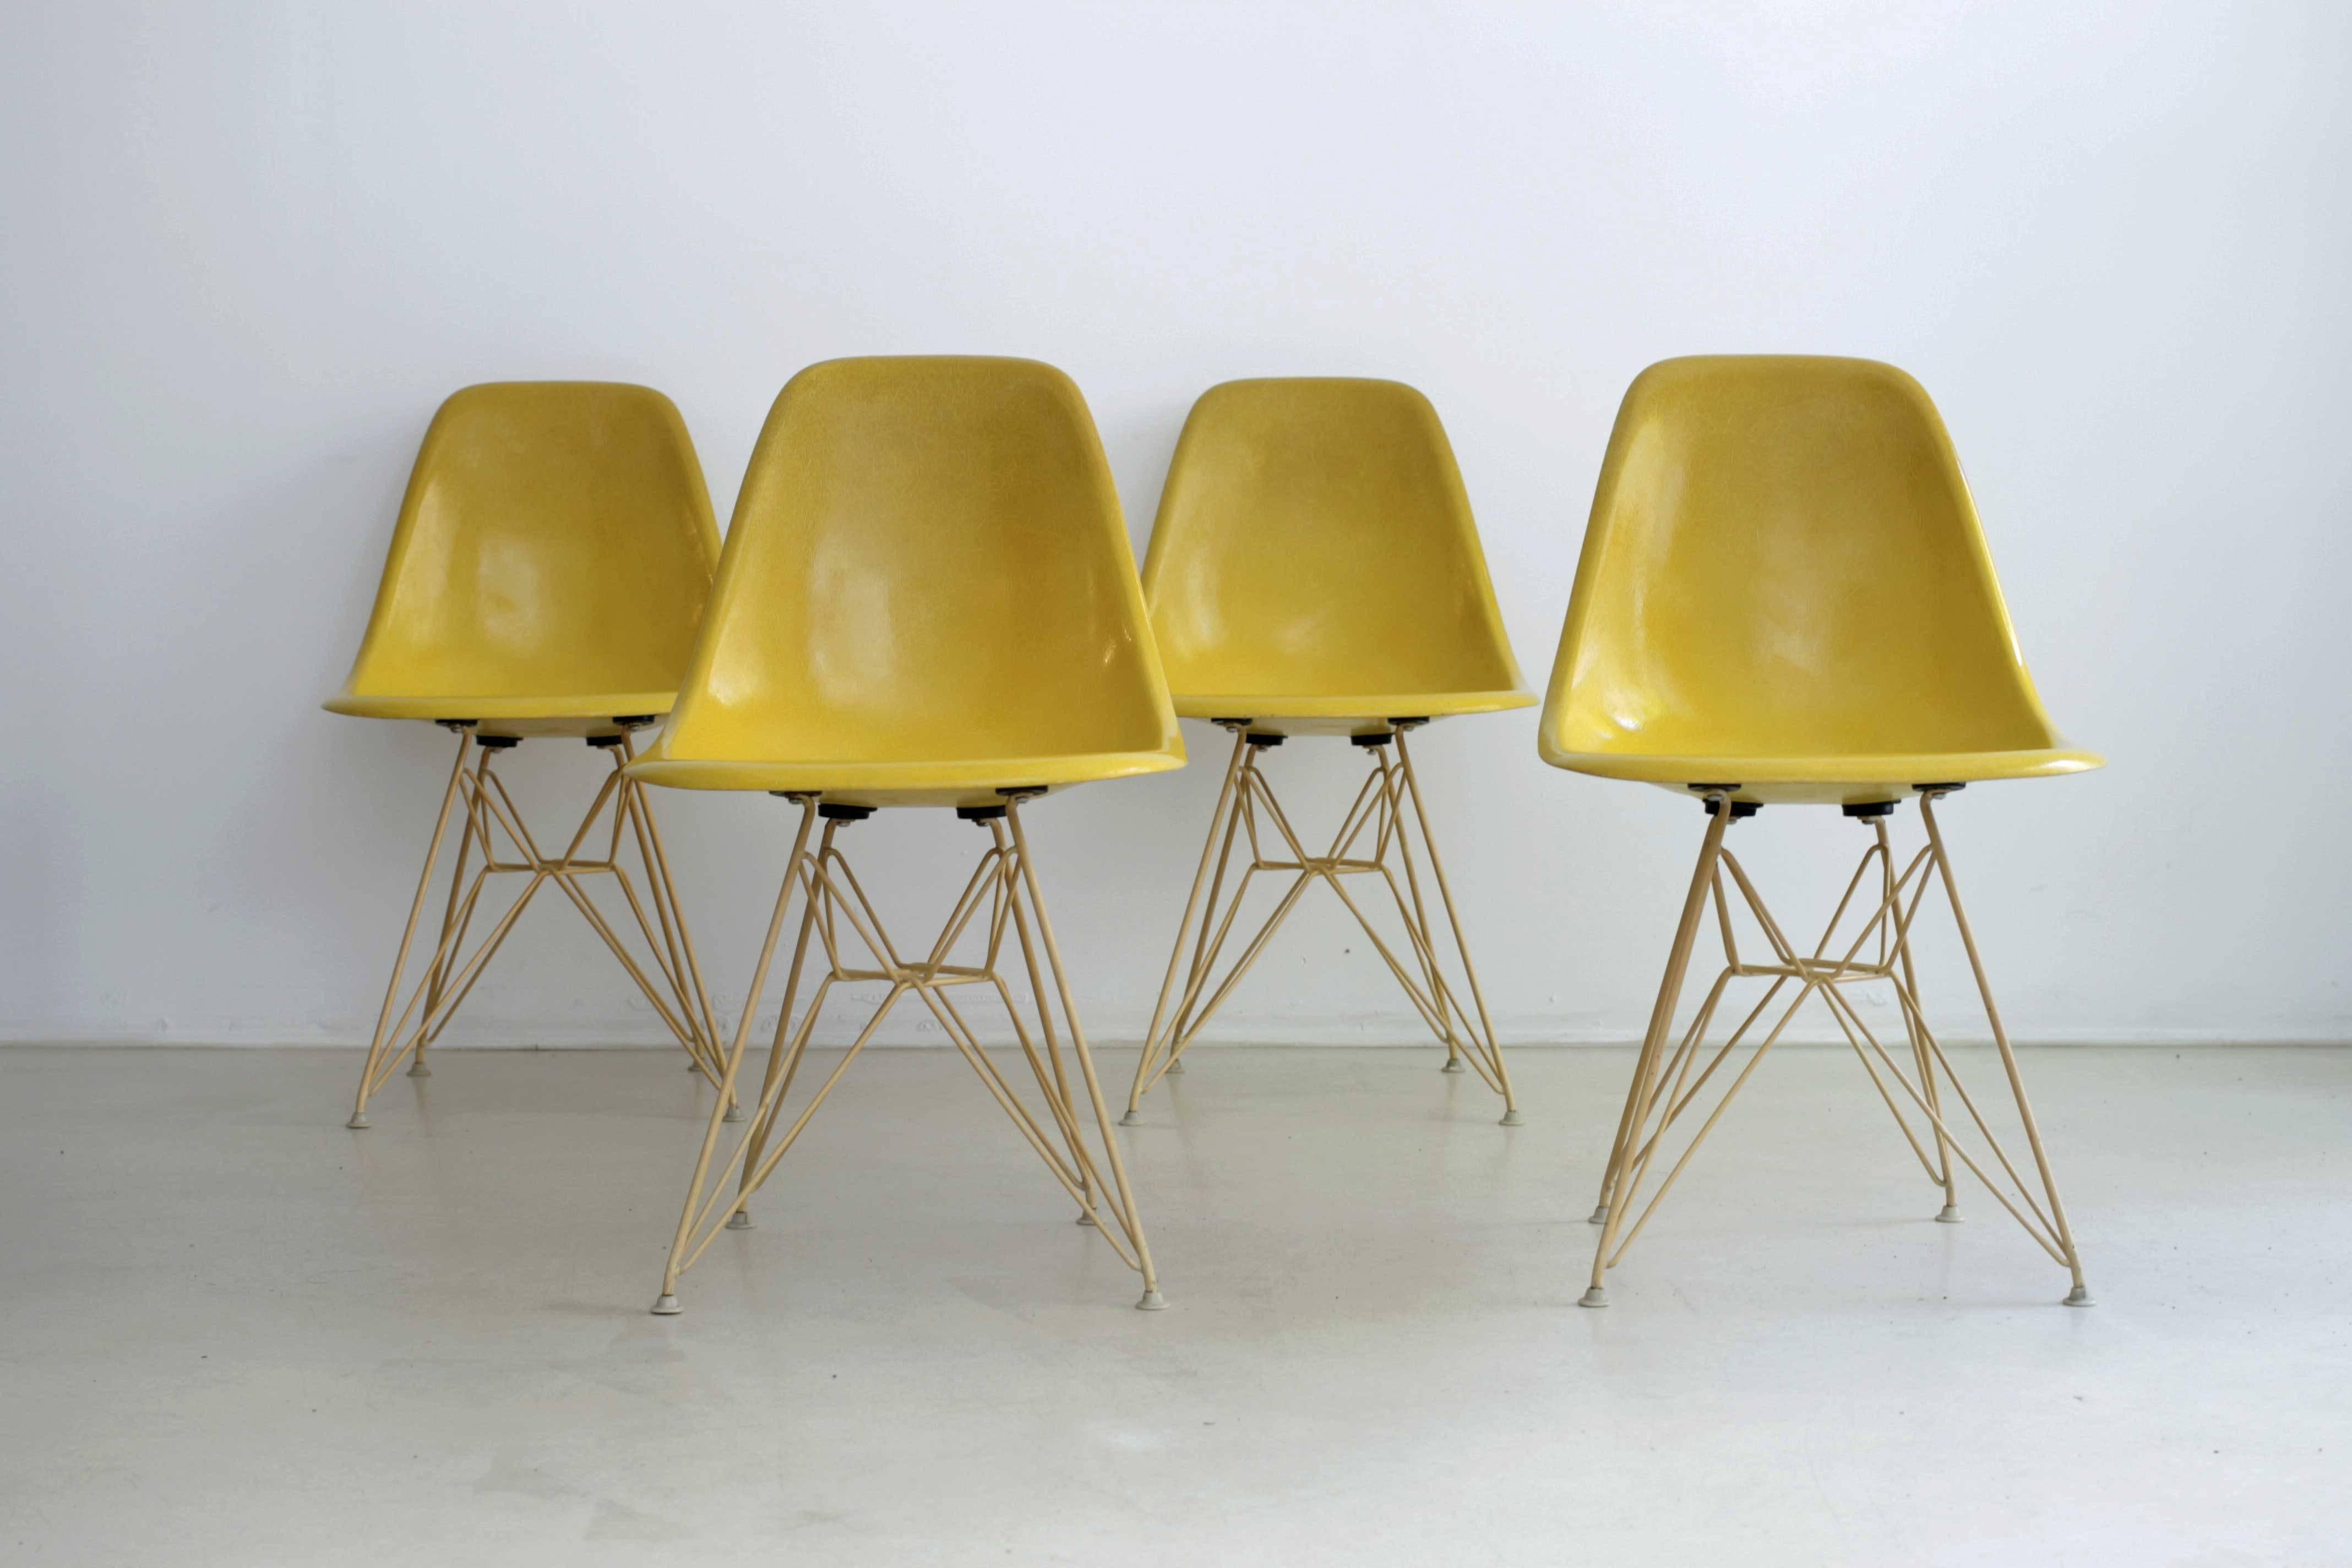 Rare set of four Eiffel tower base chairs made by Herman Miller. Original bases covered with a Rislan. Chairs are in very good condition.